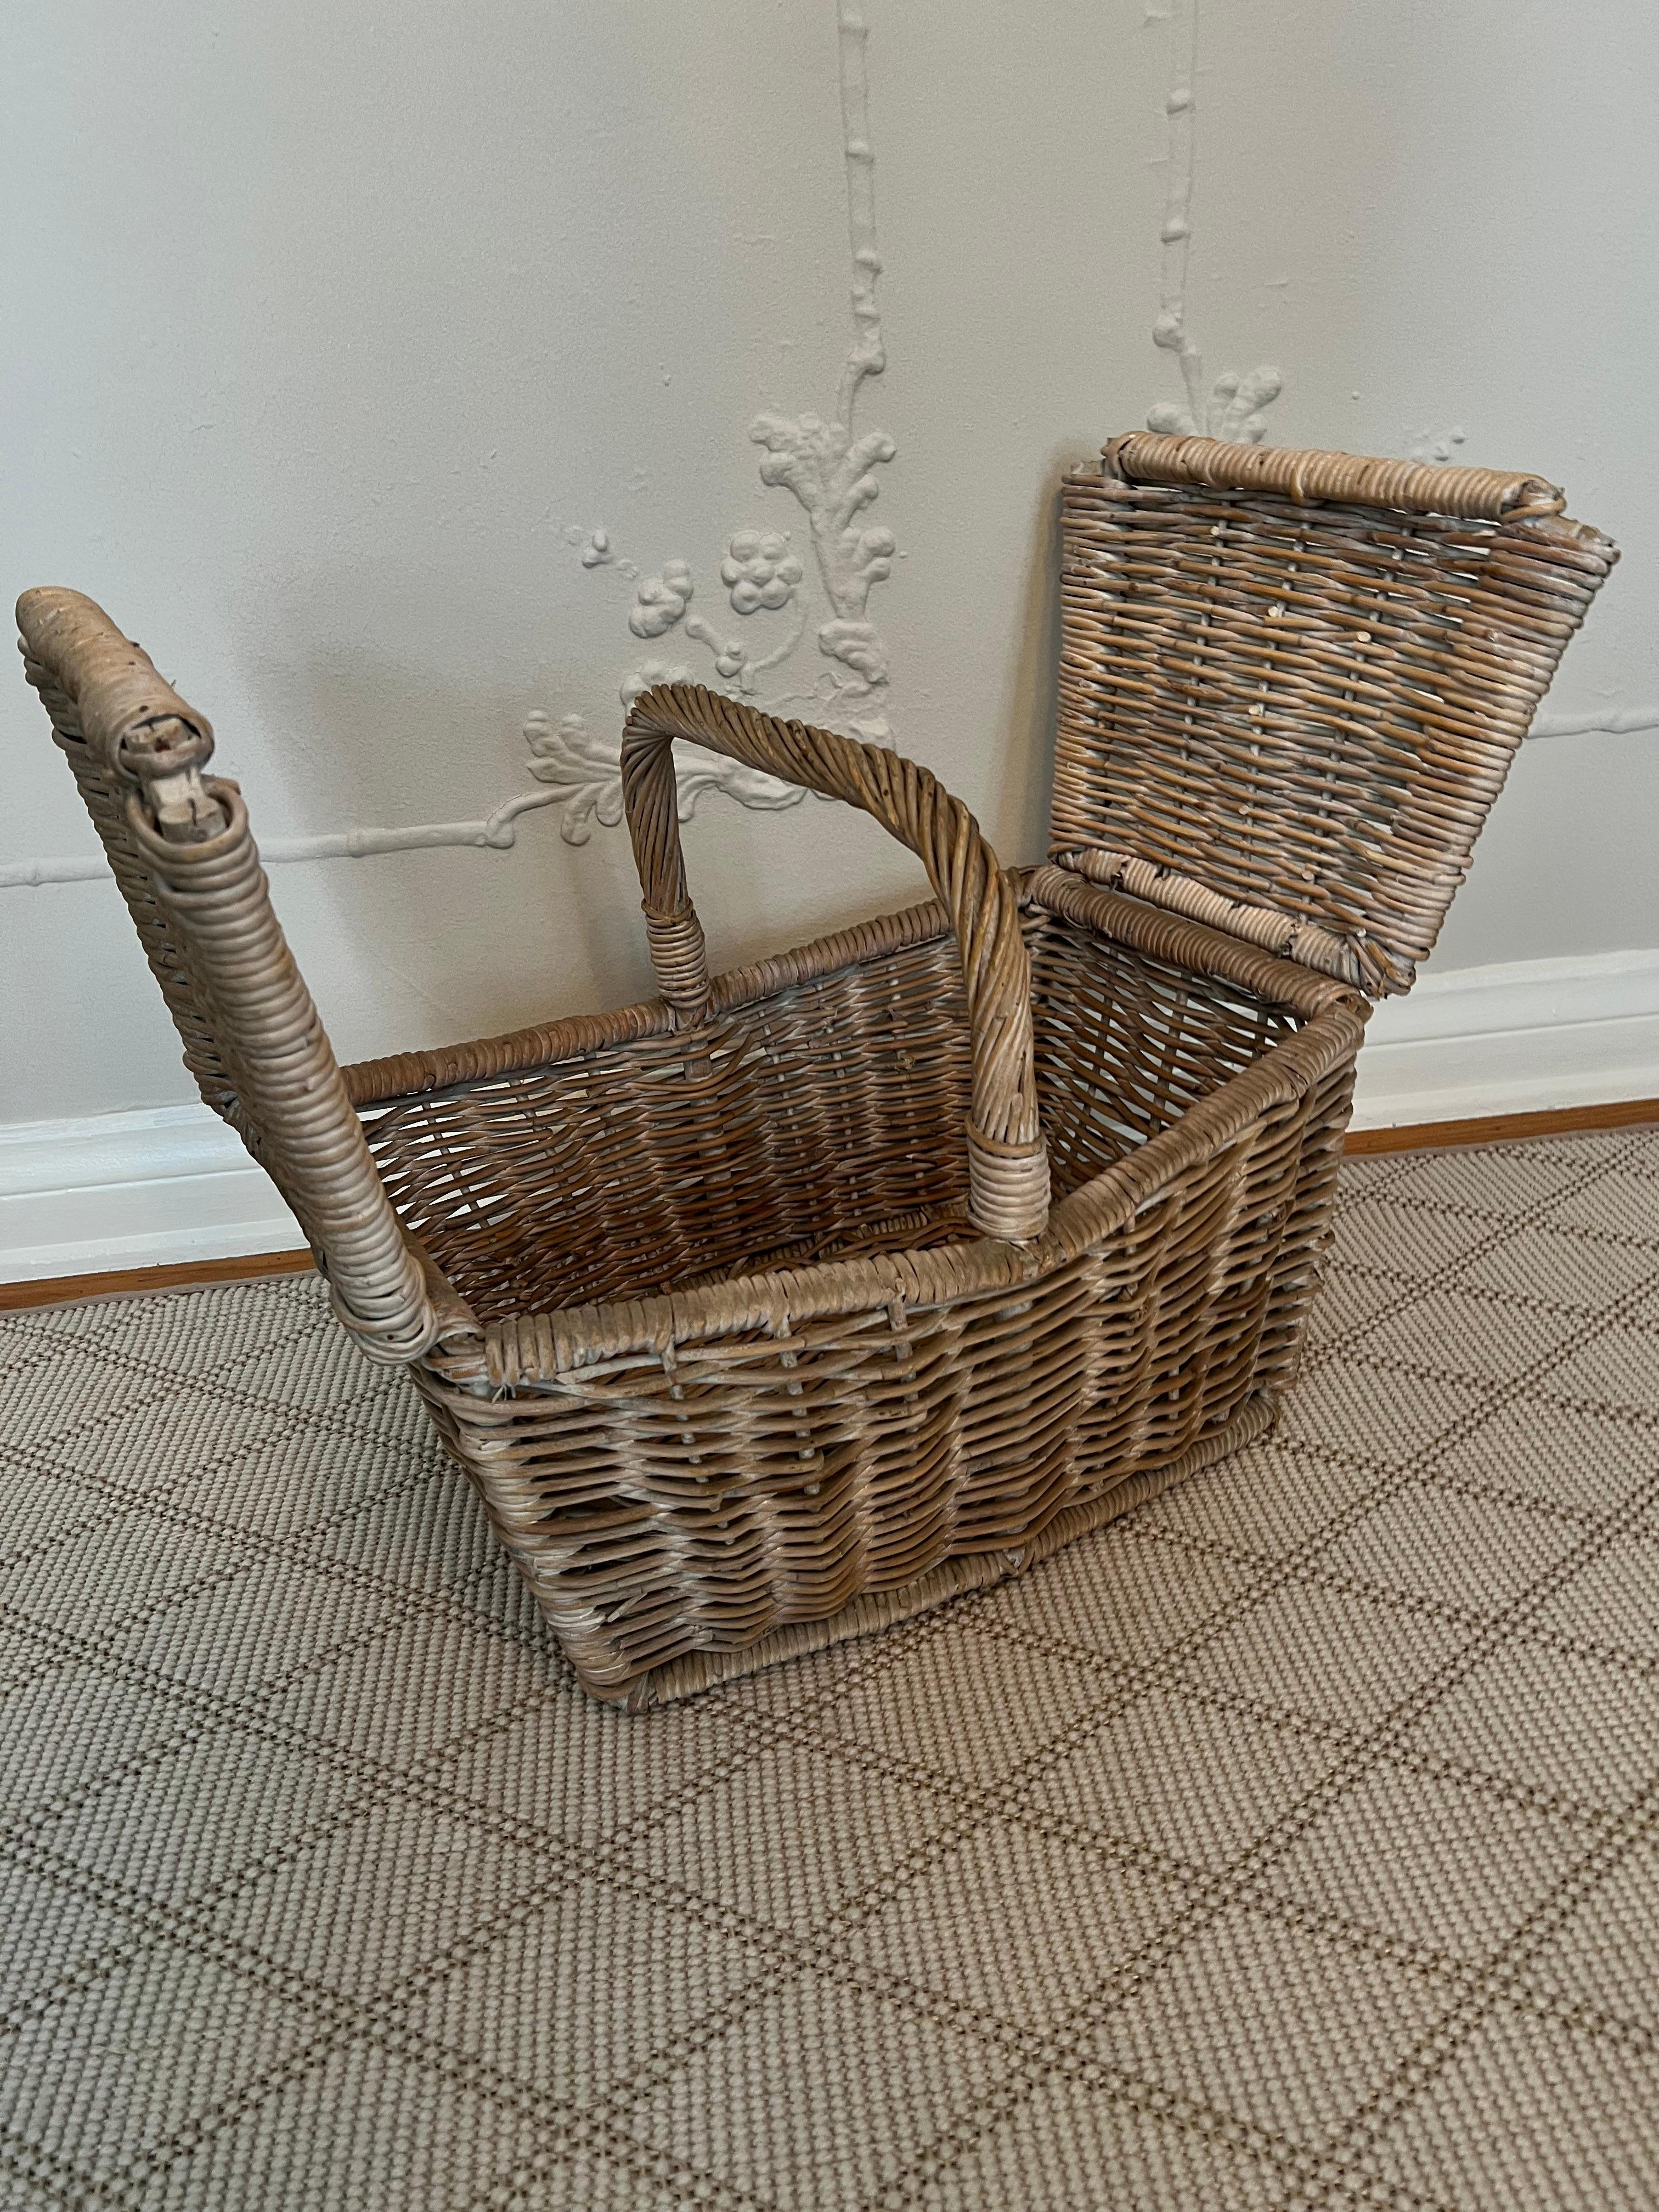 Woven Rattan Picnic Basket with Center Handle and Duo Opening Sides In Good Condition For Sale In Los Angeles, CA